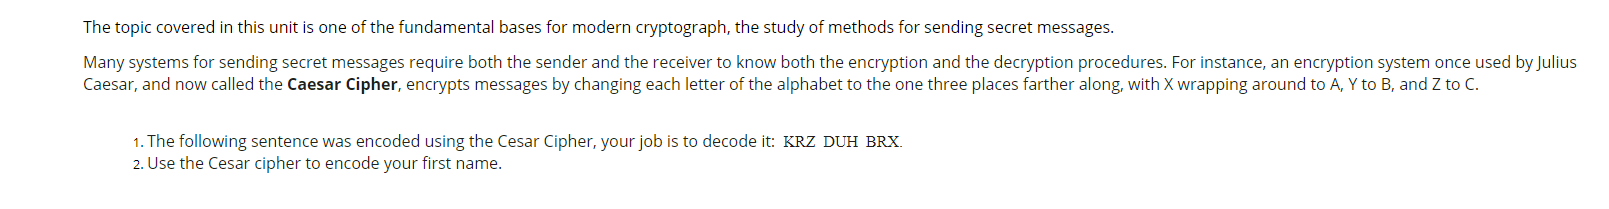 1. The following sentence was encoded using the Cesar Cipher, your job is to decode it: KRZ DUH BRX.
